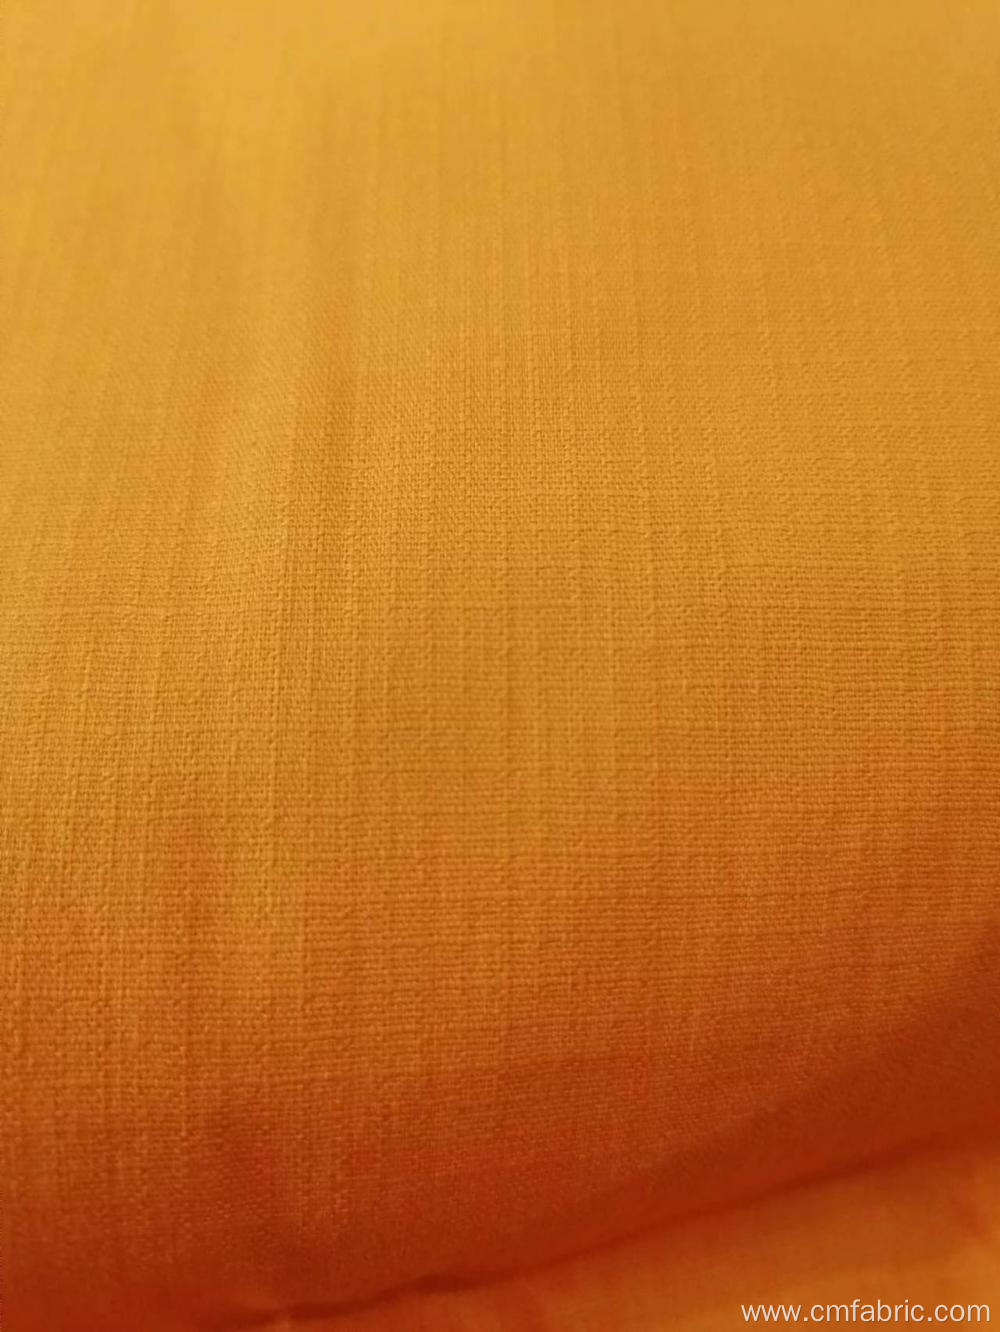 cotton spandex ripstop plain dyed fabric